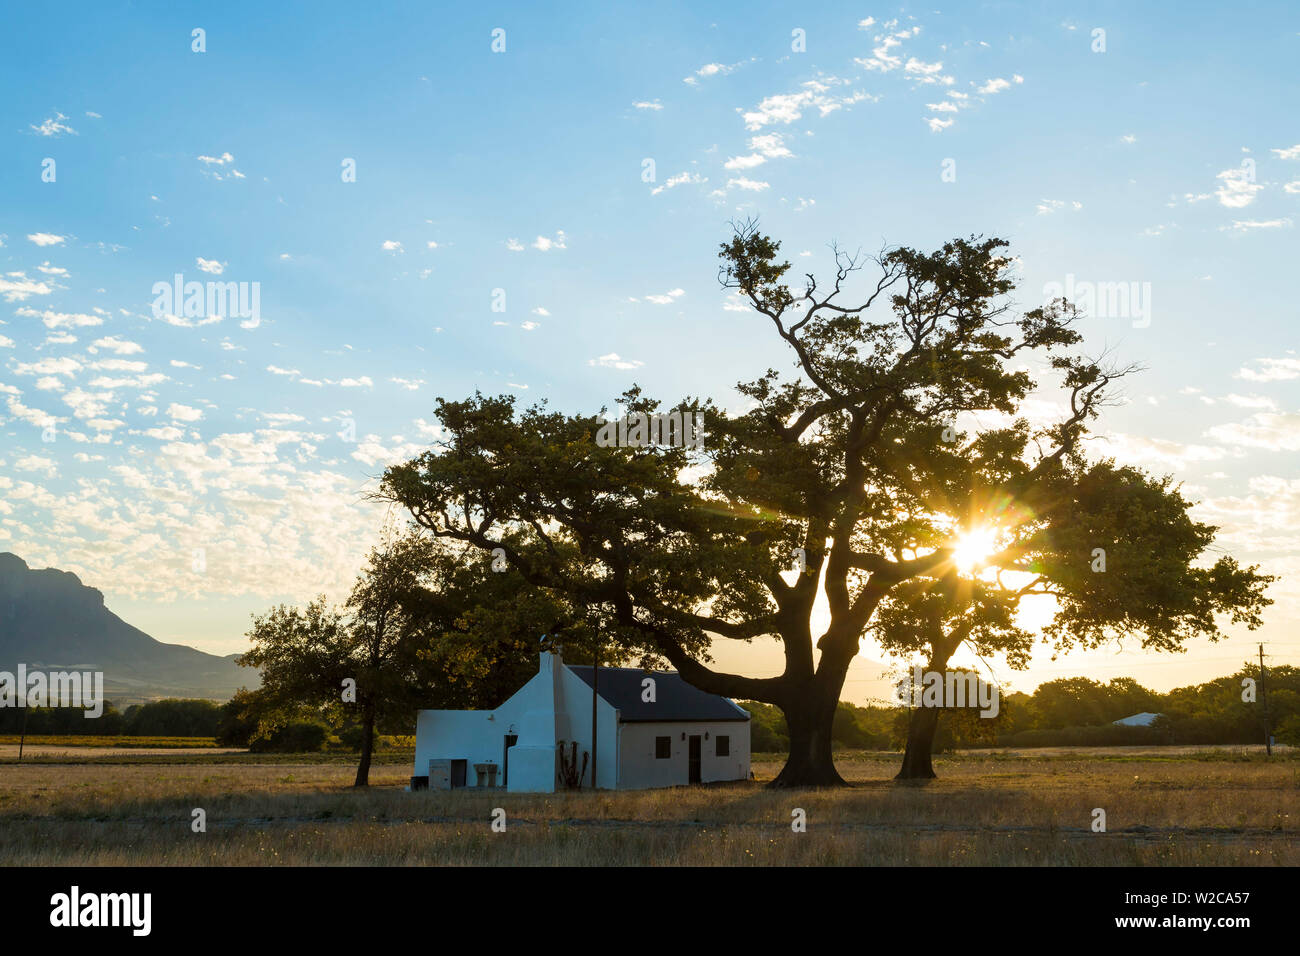 Farmhouse nr Franschoek, Winelands, Western Cape Province, South Africa Stock Photo